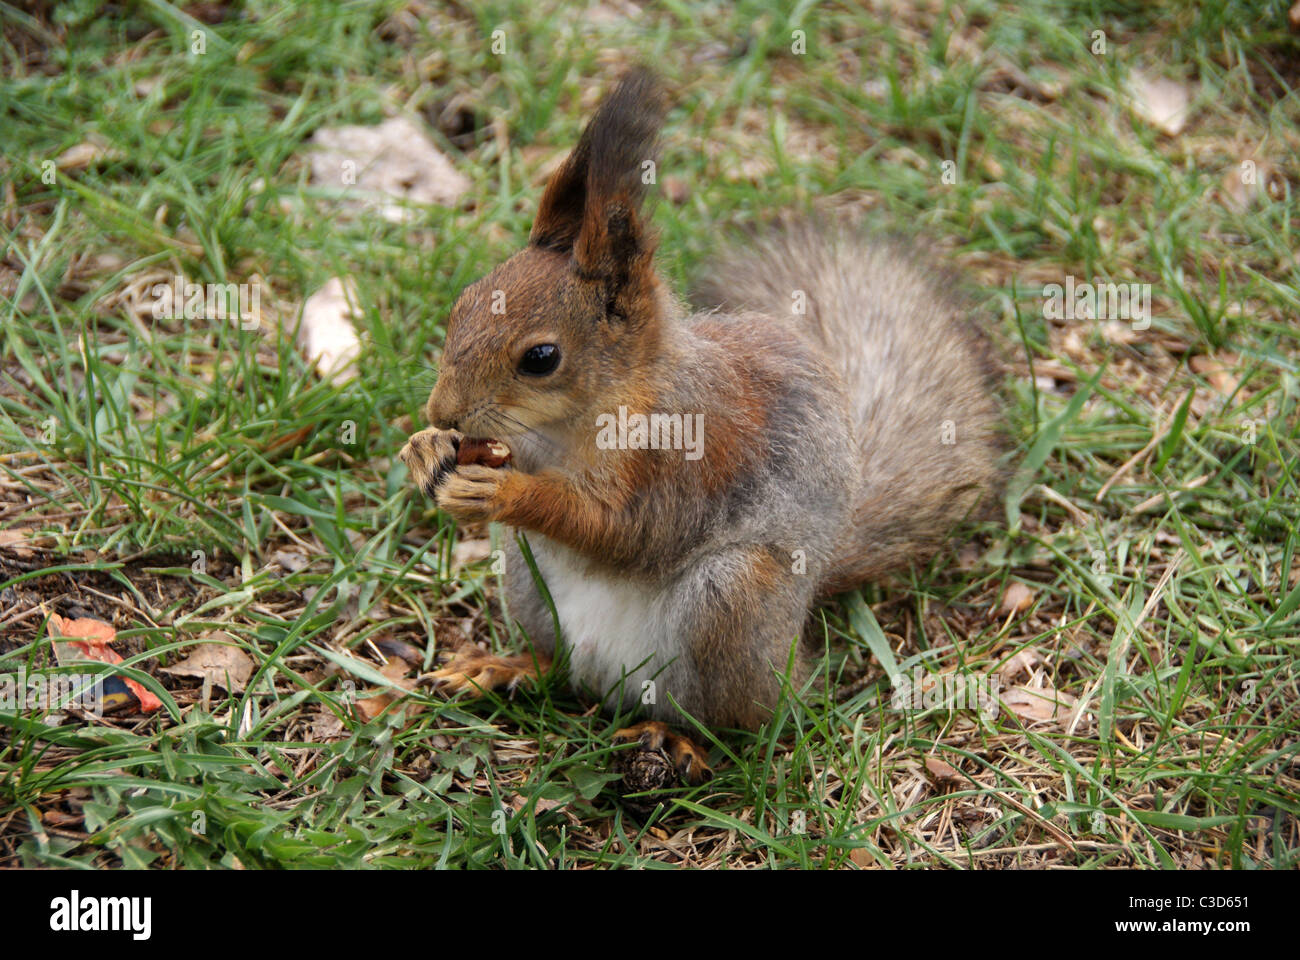 Squirrel eats a nut Stock Photo